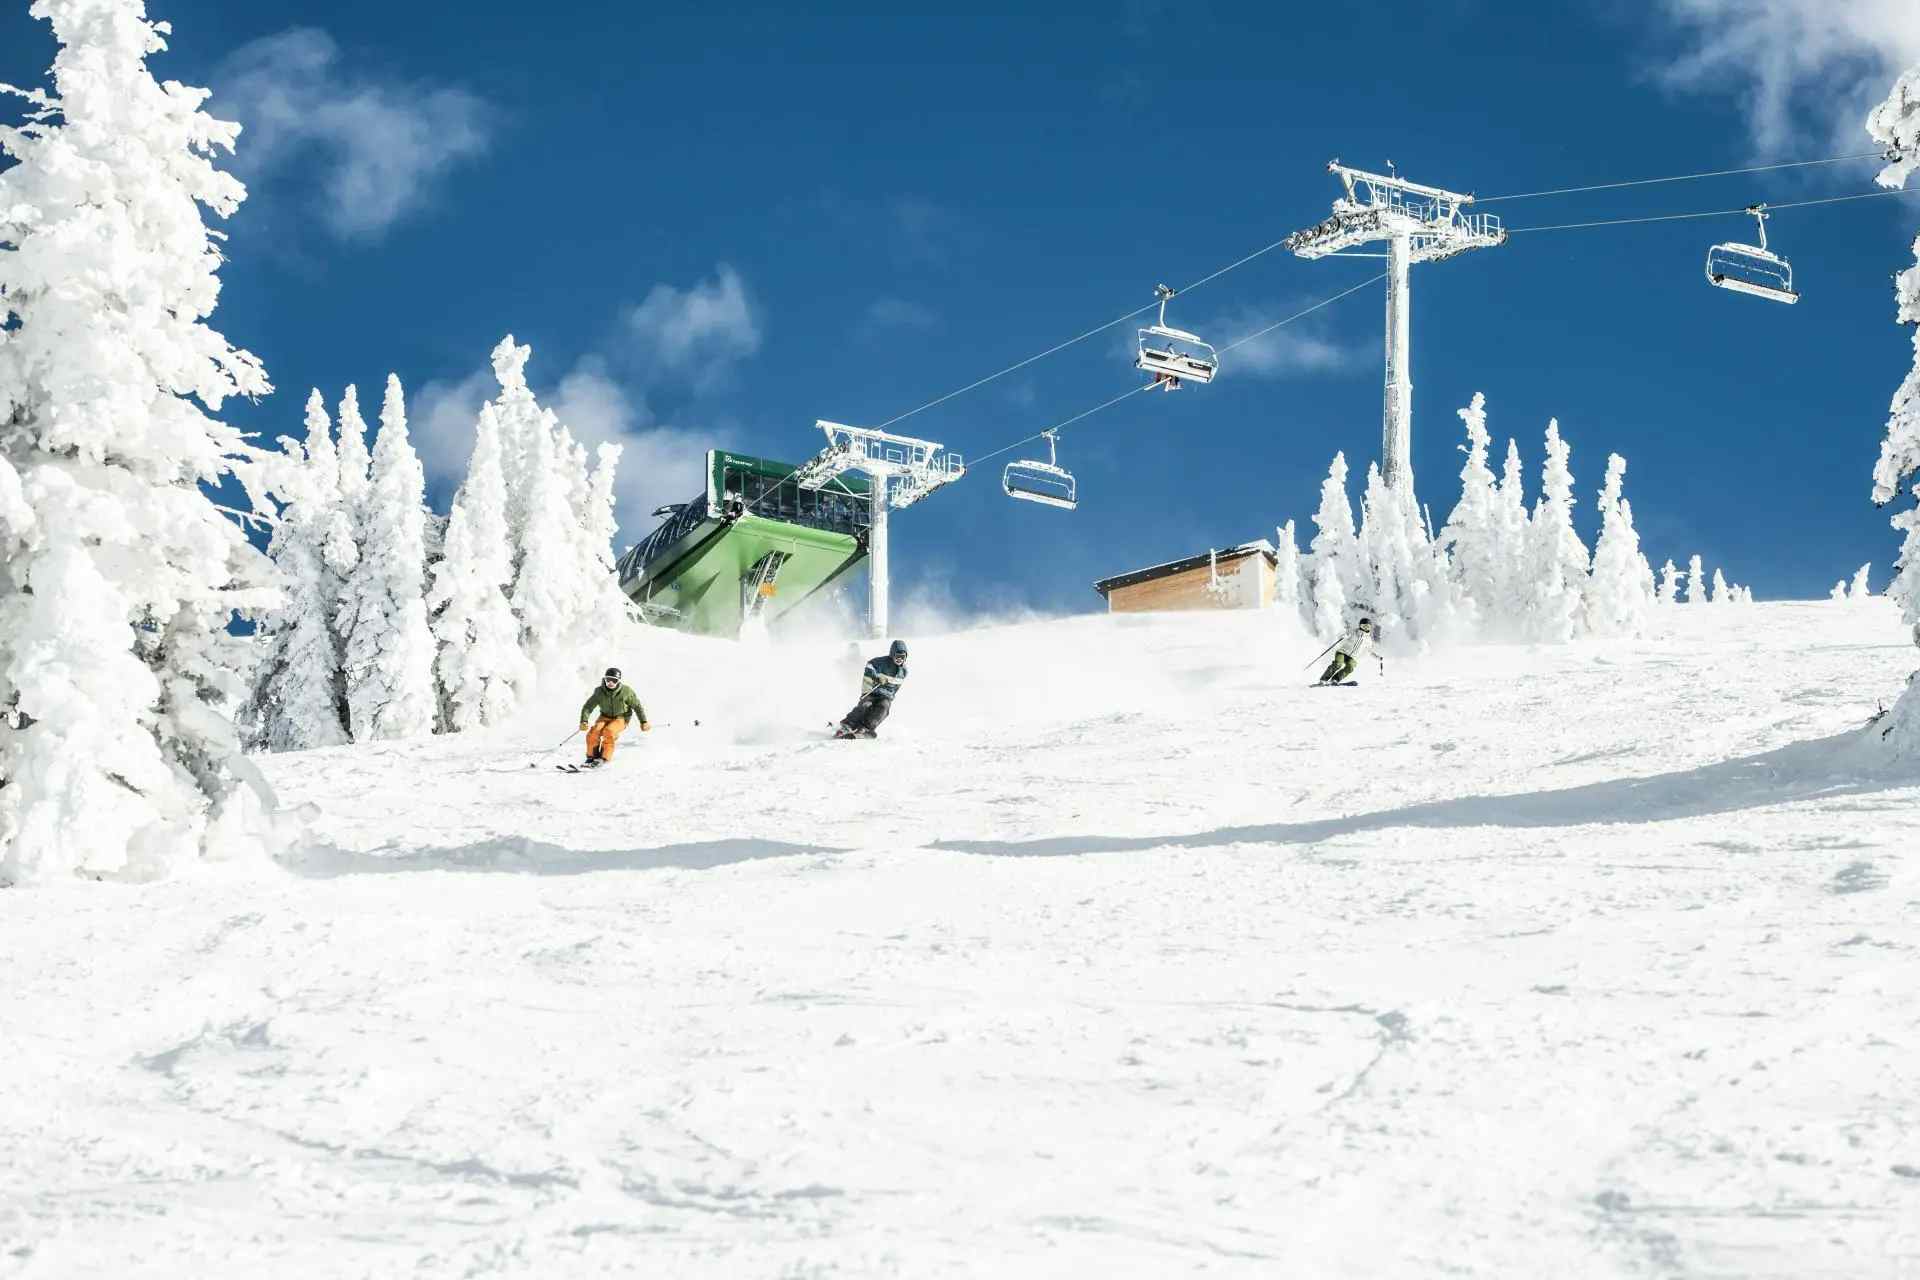 Grand Targhee Mountain Resort of Driggs, Idaho and Alta, Wyoming within the Yellowstone Teton Territory boasts some of the best skiing the West has to offer.